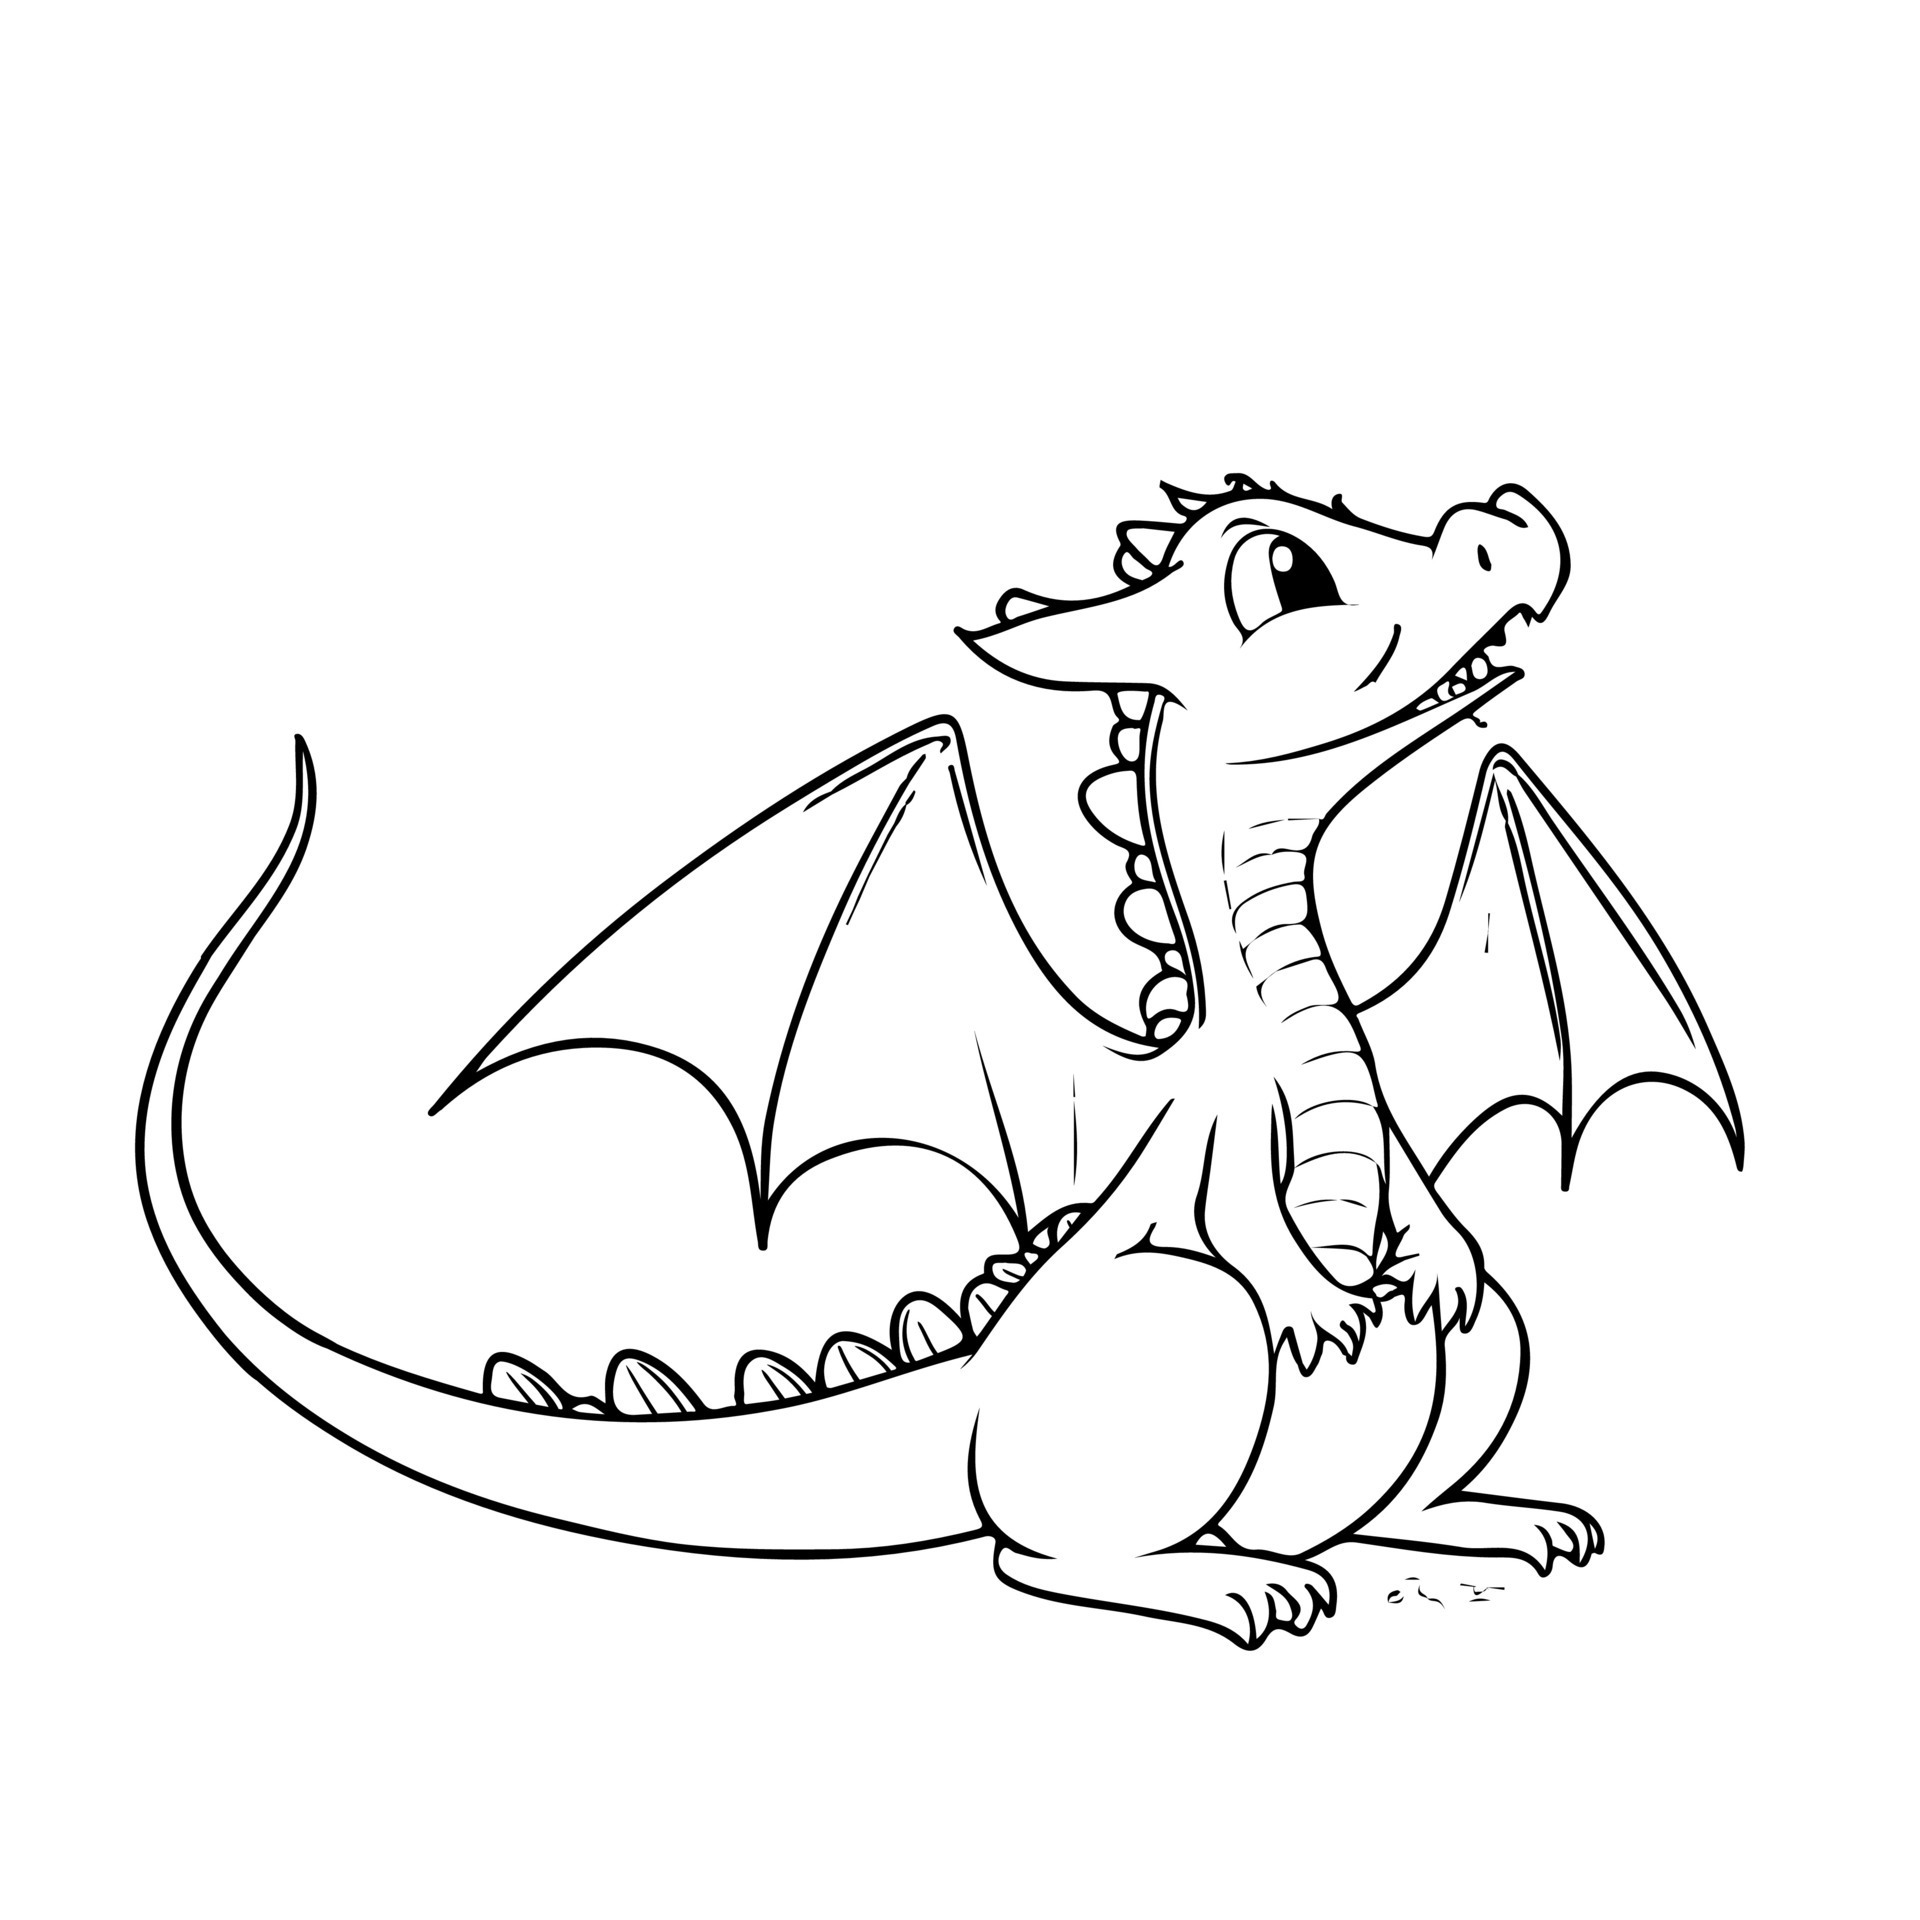 Learn How to Draw a Dragon (Dragons) Step by Step : Drawing Tutorials